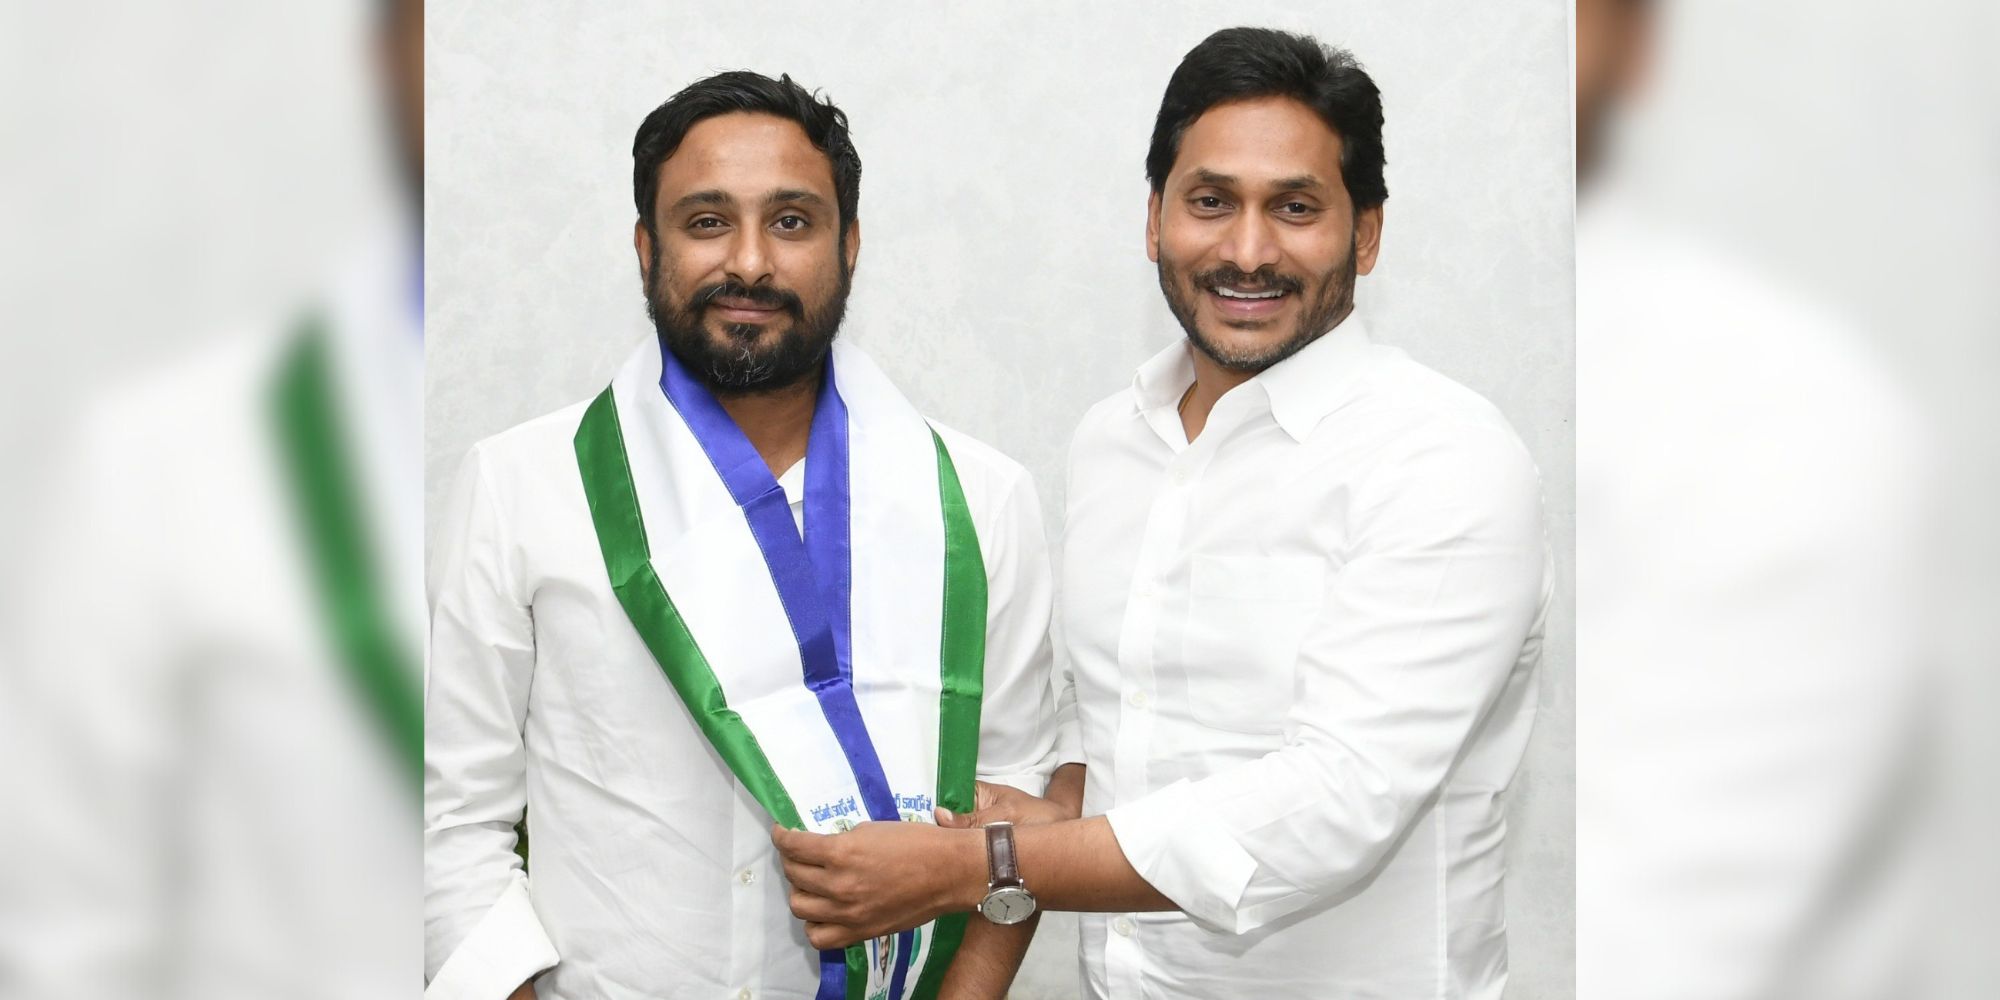 Ambati Rayudu being welcomed into the YSRCP by YS Jagan Mohan Reddy.